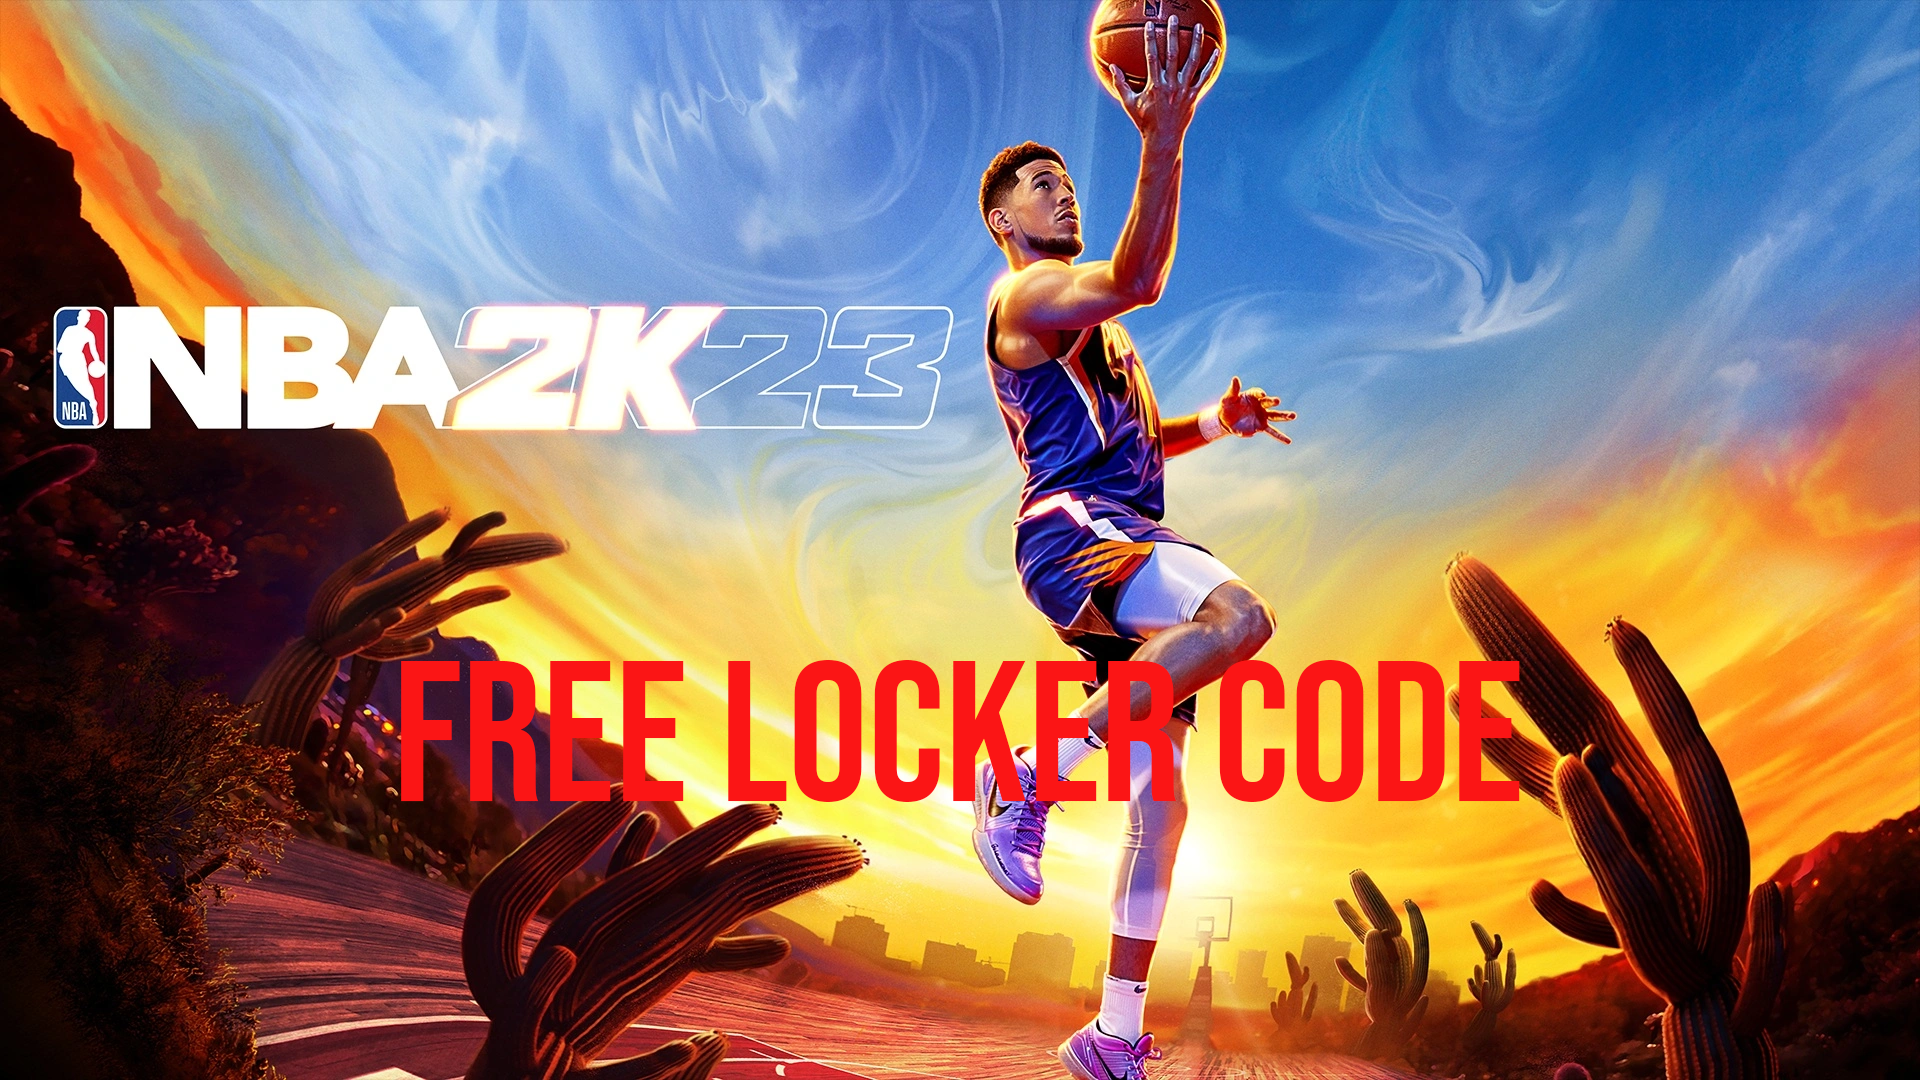 Locker Codes For NBA 2K23 (January 4th 2023) - How to Get and Redeem